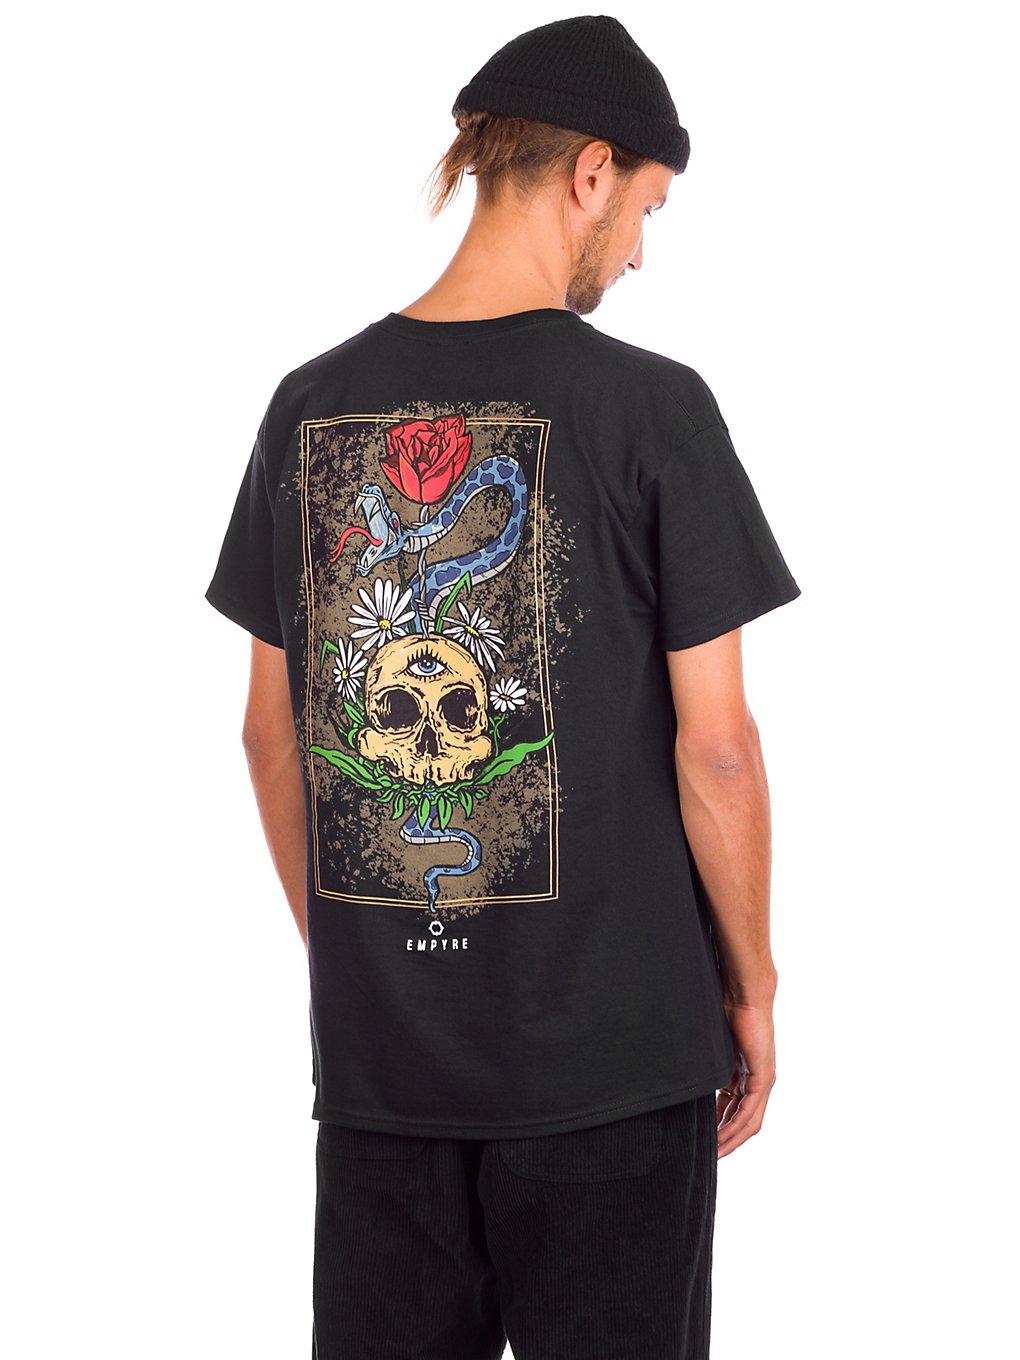 Empyre Grow and Decay T-Shirt black kaufen